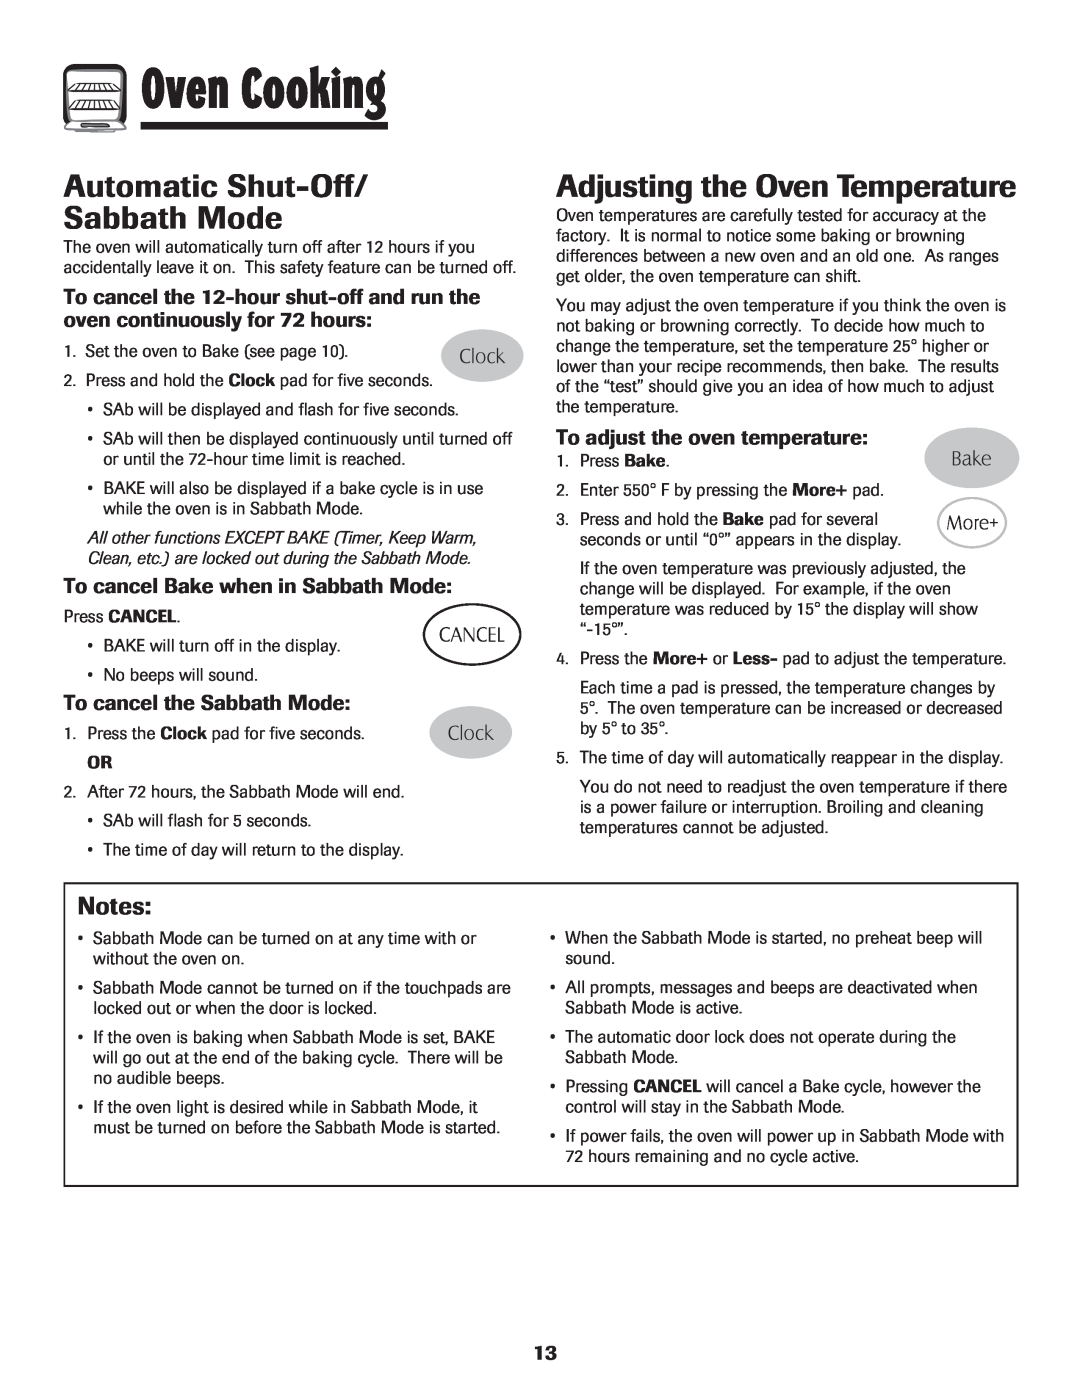 Maytag 500 Series Automatic Shut-Off Sabbath Mode, Adjusting the Oven Temperature, To cancel Bake when in Sabbath Mode 